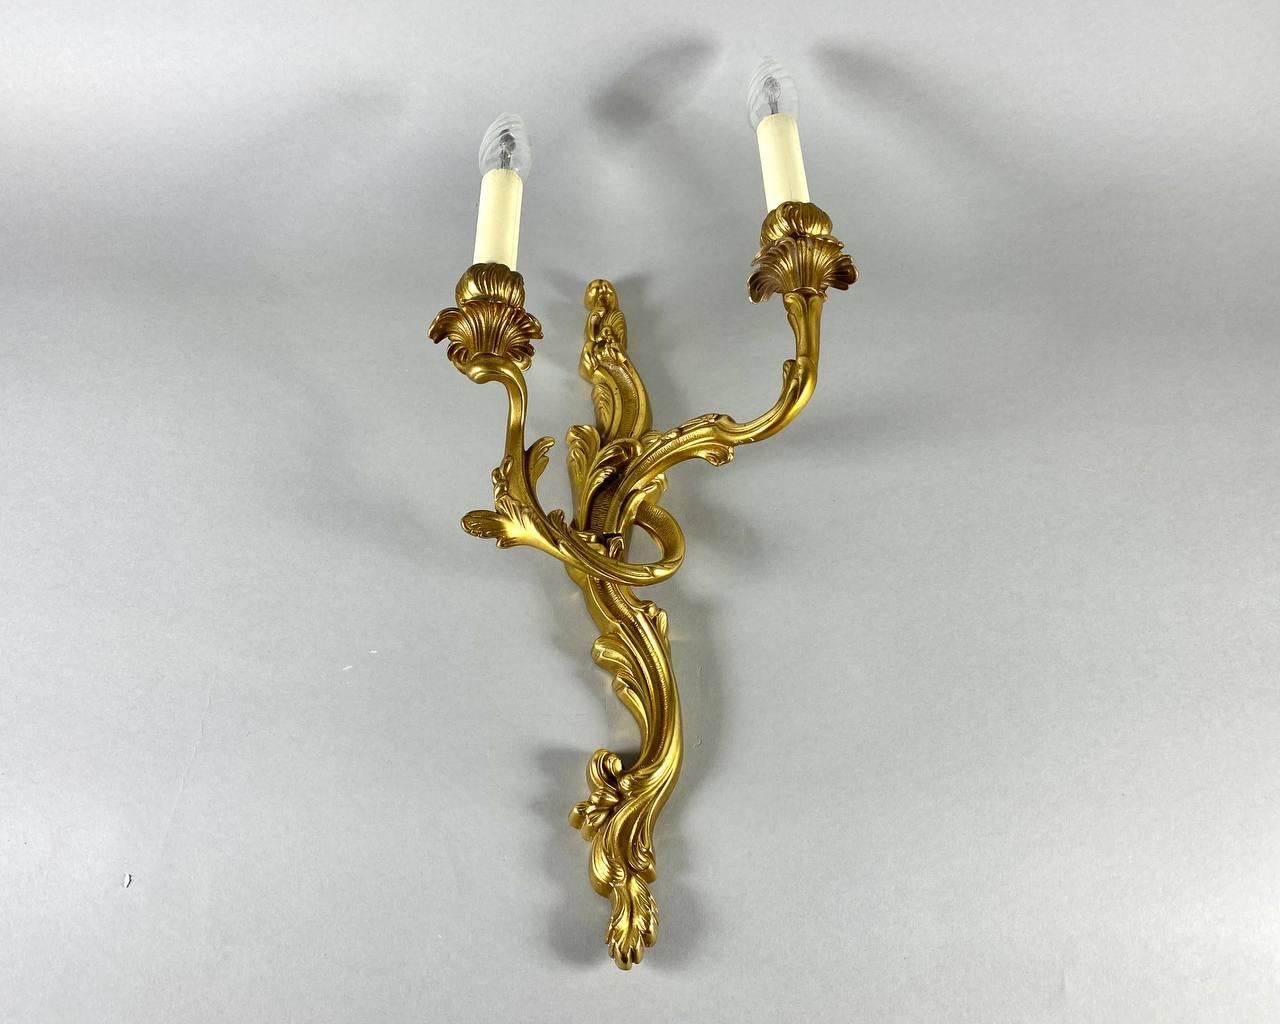 Amazing Large Wall Sconce in Gilt Bronze Vintage Wall Sconce, 20th Century For Sale 3